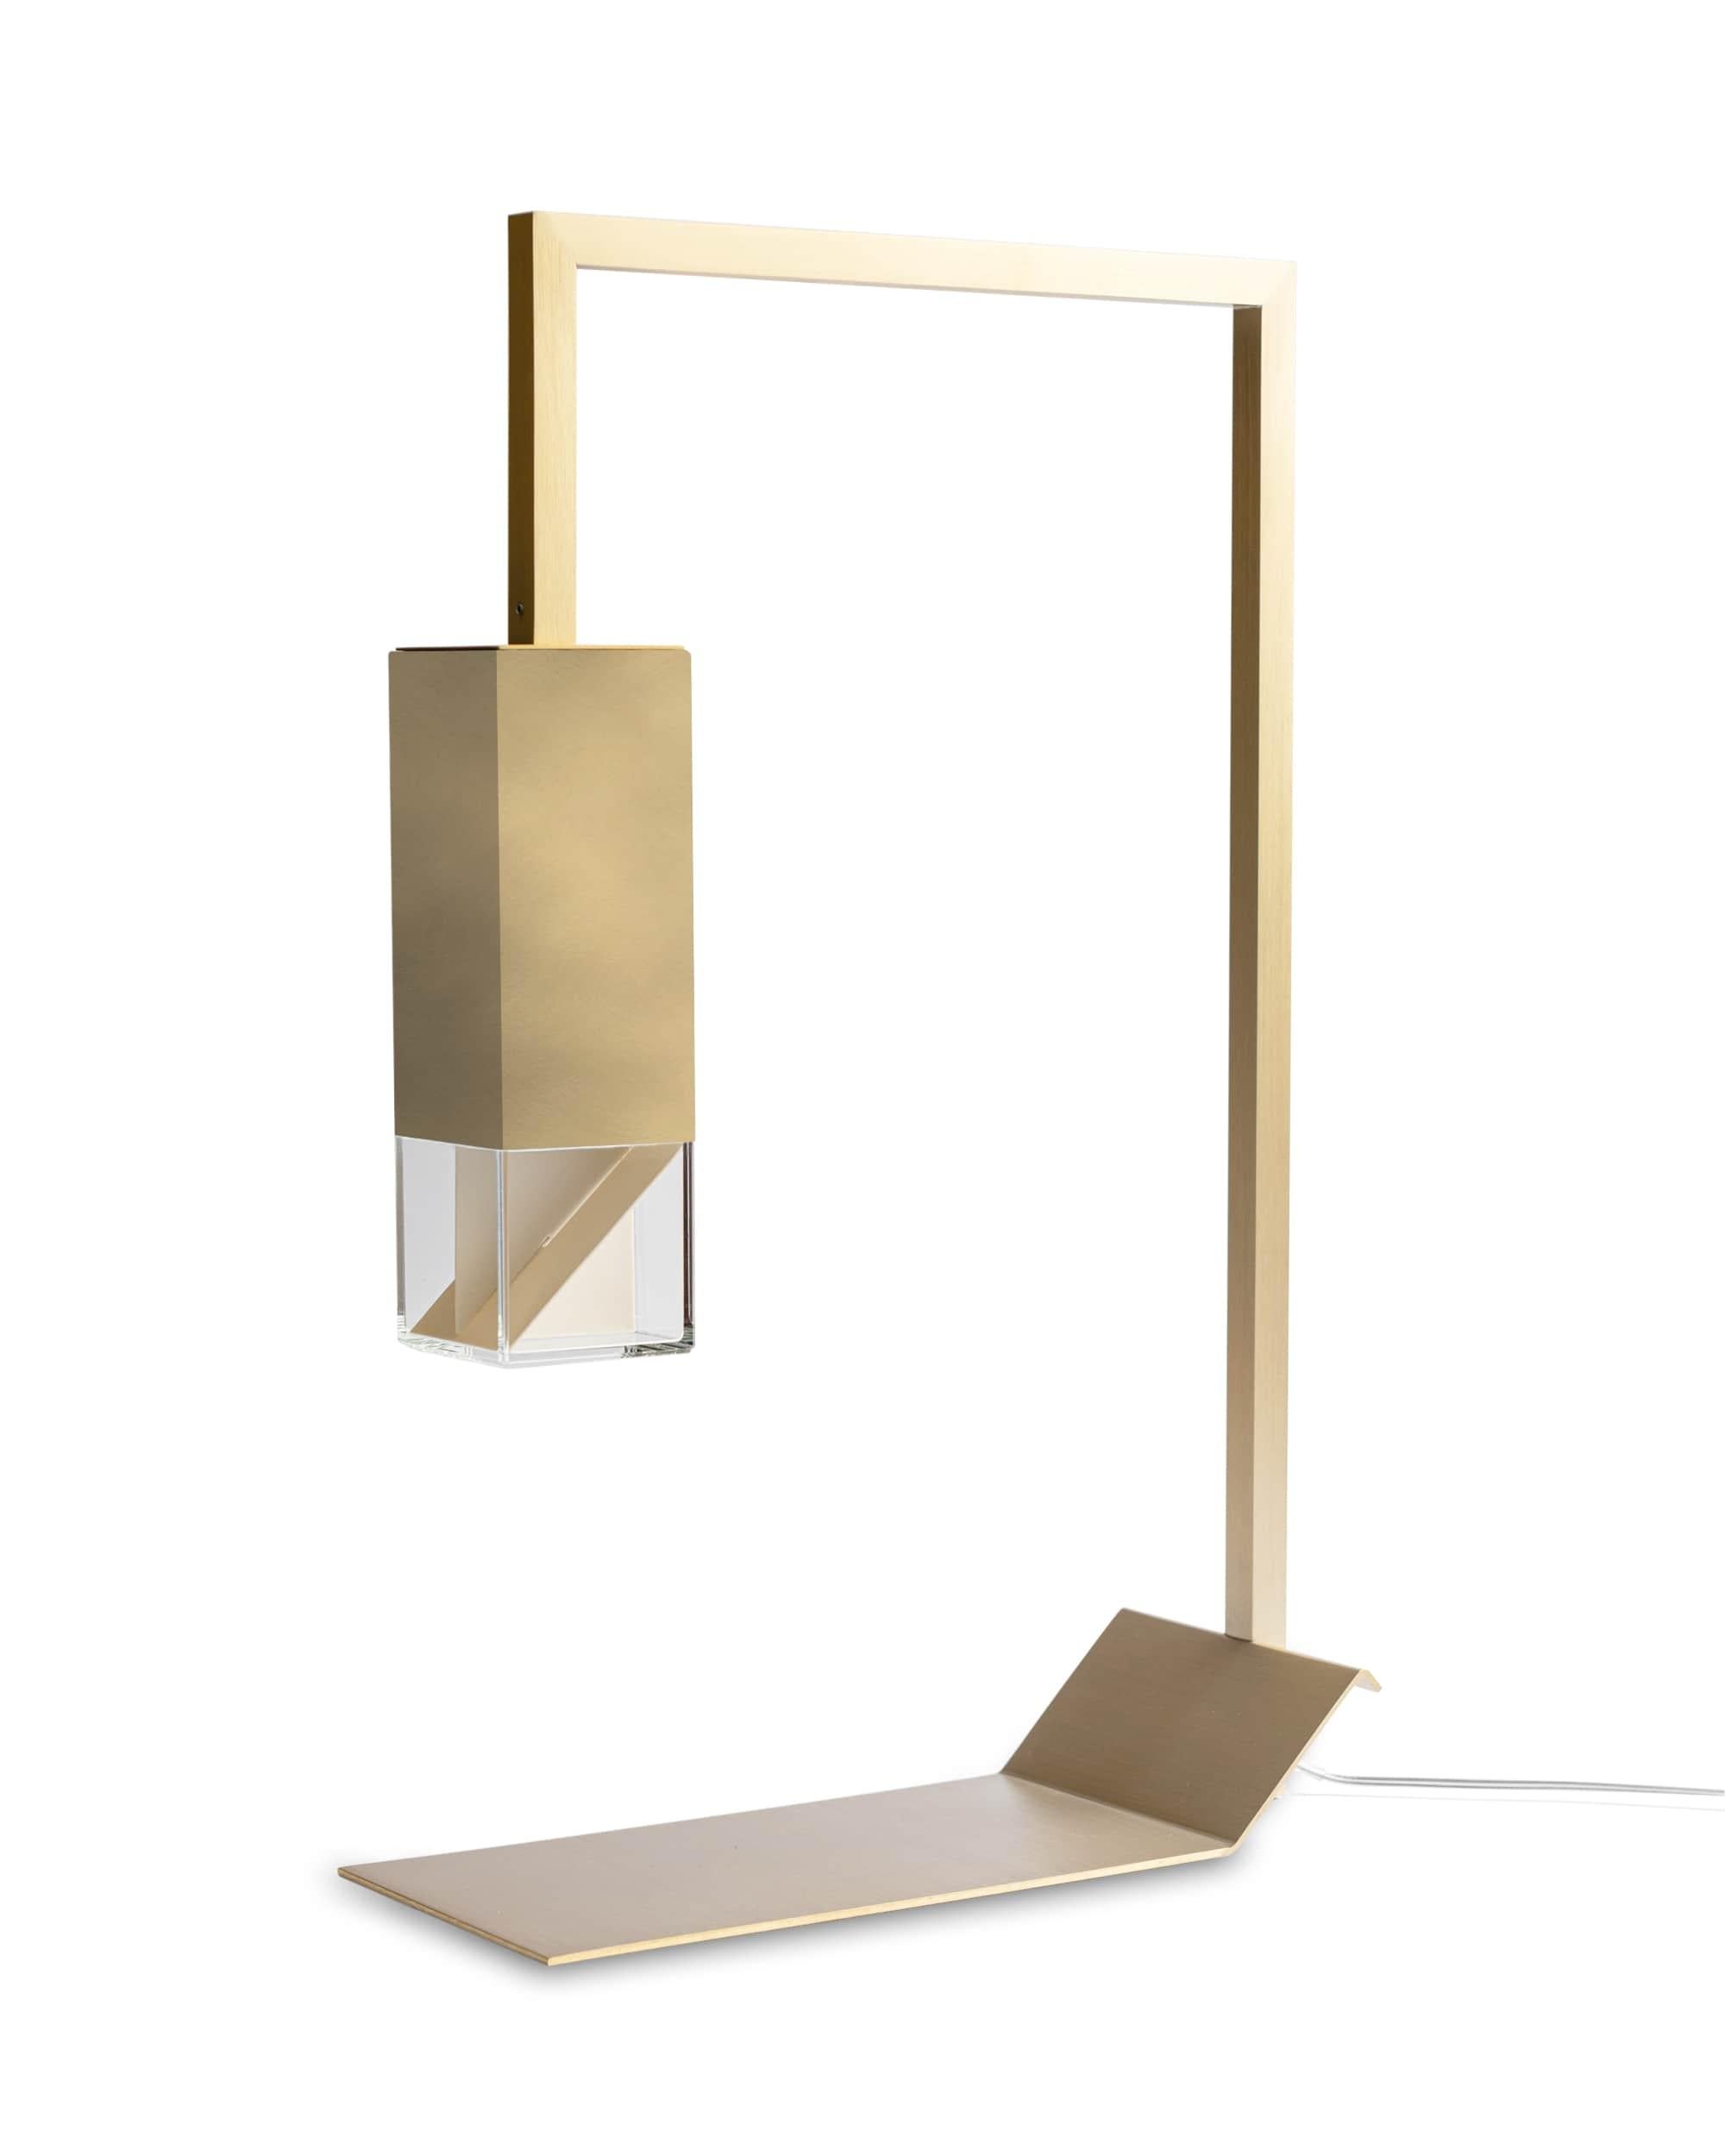 Brass table lamp two 02 Revamp Edition by Formaminima
Limited Edition of 250 pieces. Numbered and signed with certificate of authenticity.
Dimensions: W 10 x D 25 x H 40 cm.
Materials: Crystal shade, brushed burnished brass.

All our lamps can